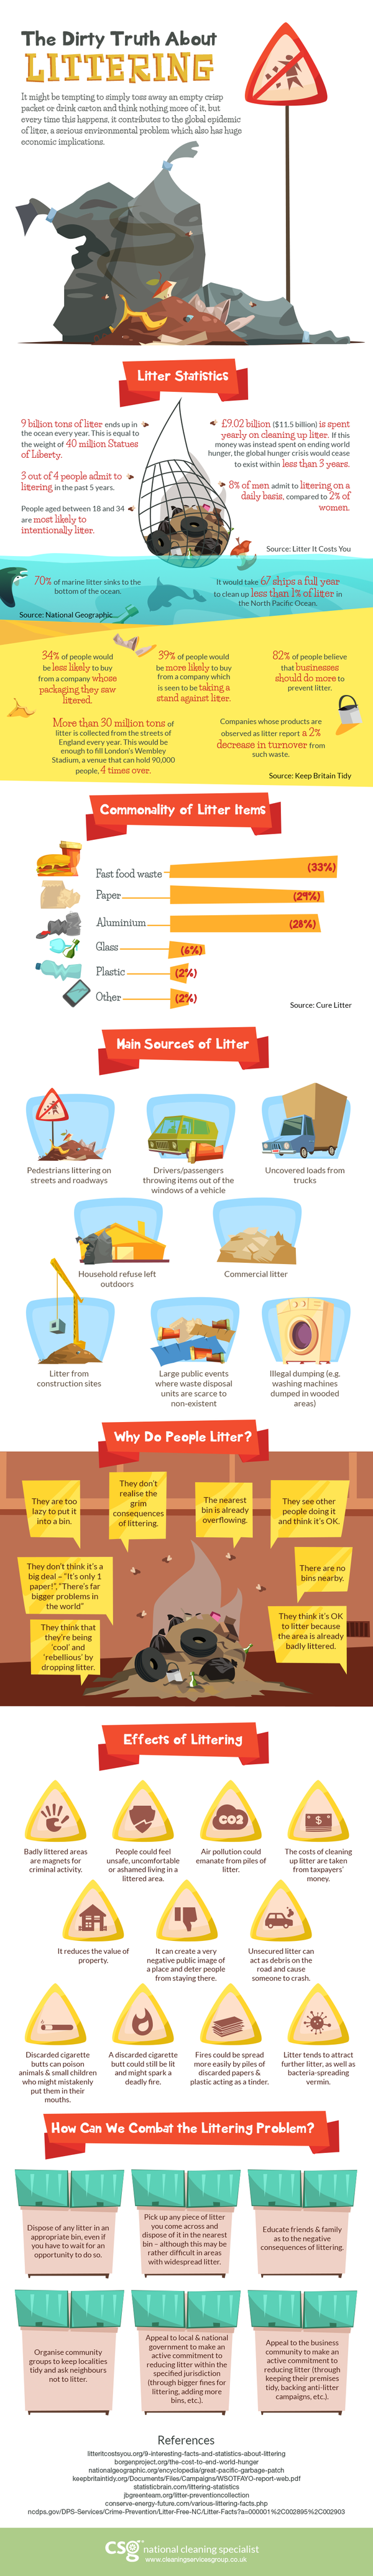 The-Dirty-Truth-About-Littering - IG